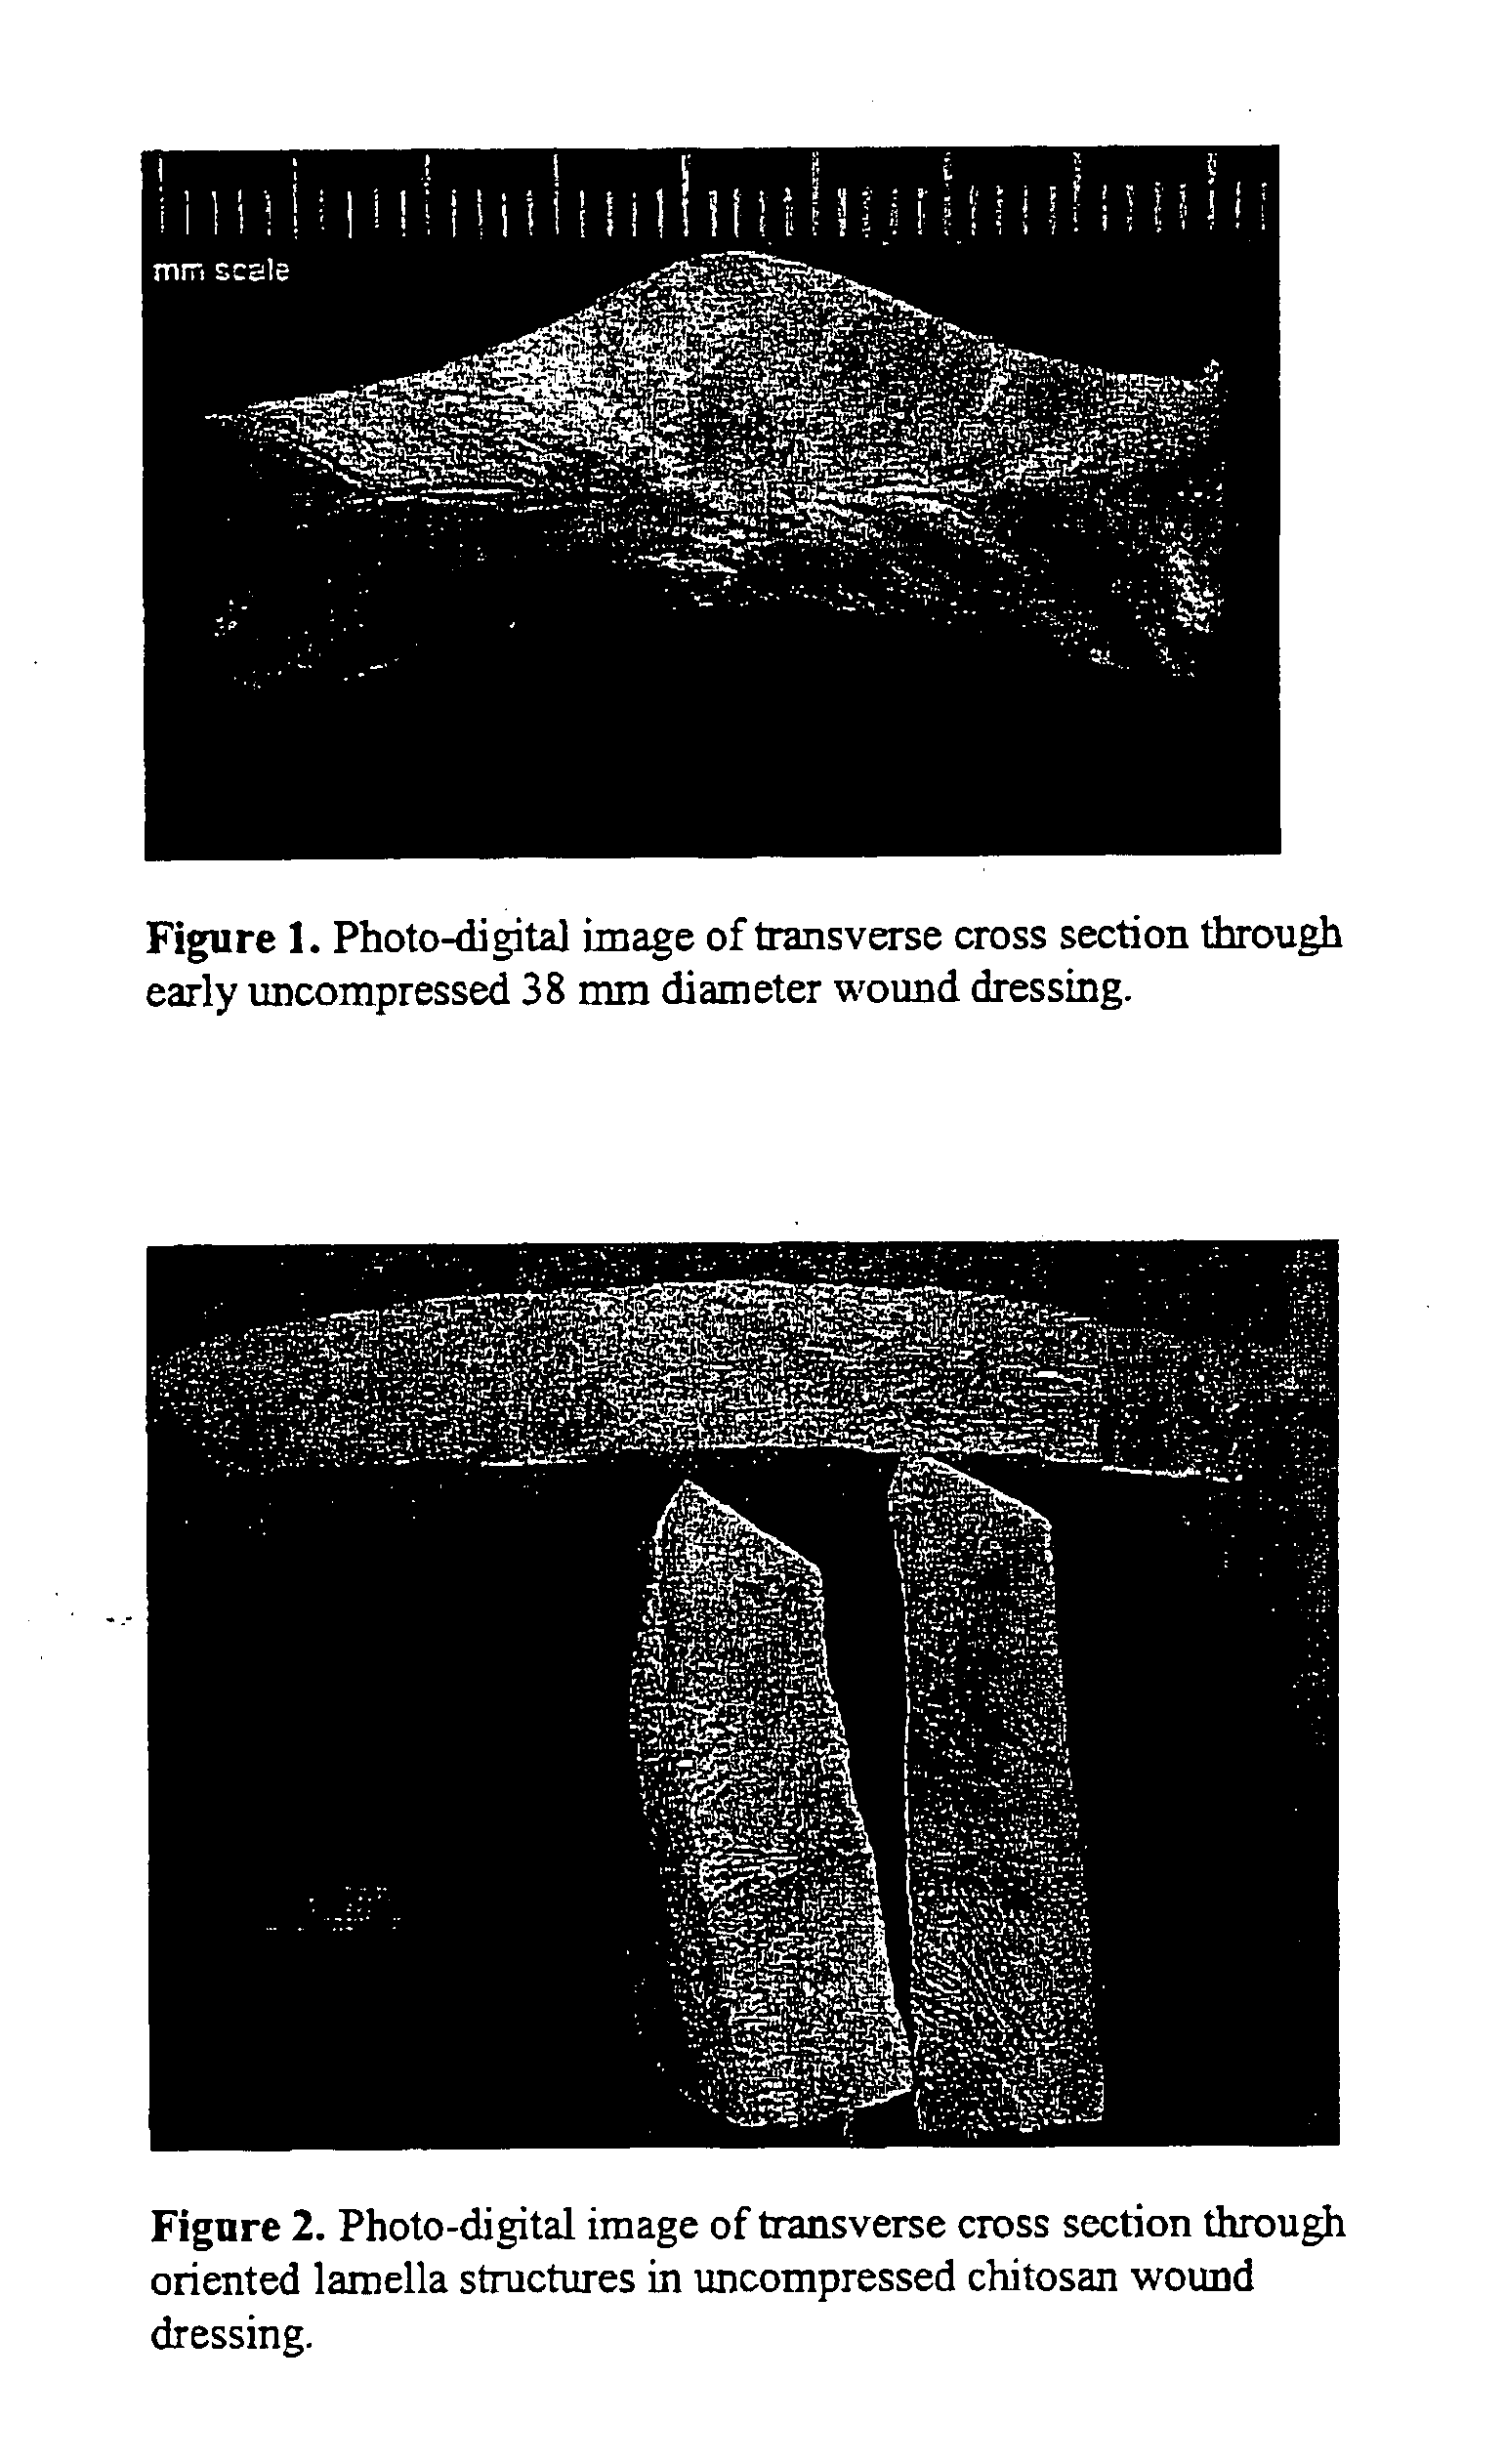 Wound dressings, apparatus, and methods for controlling severe, life-threatening bleeding